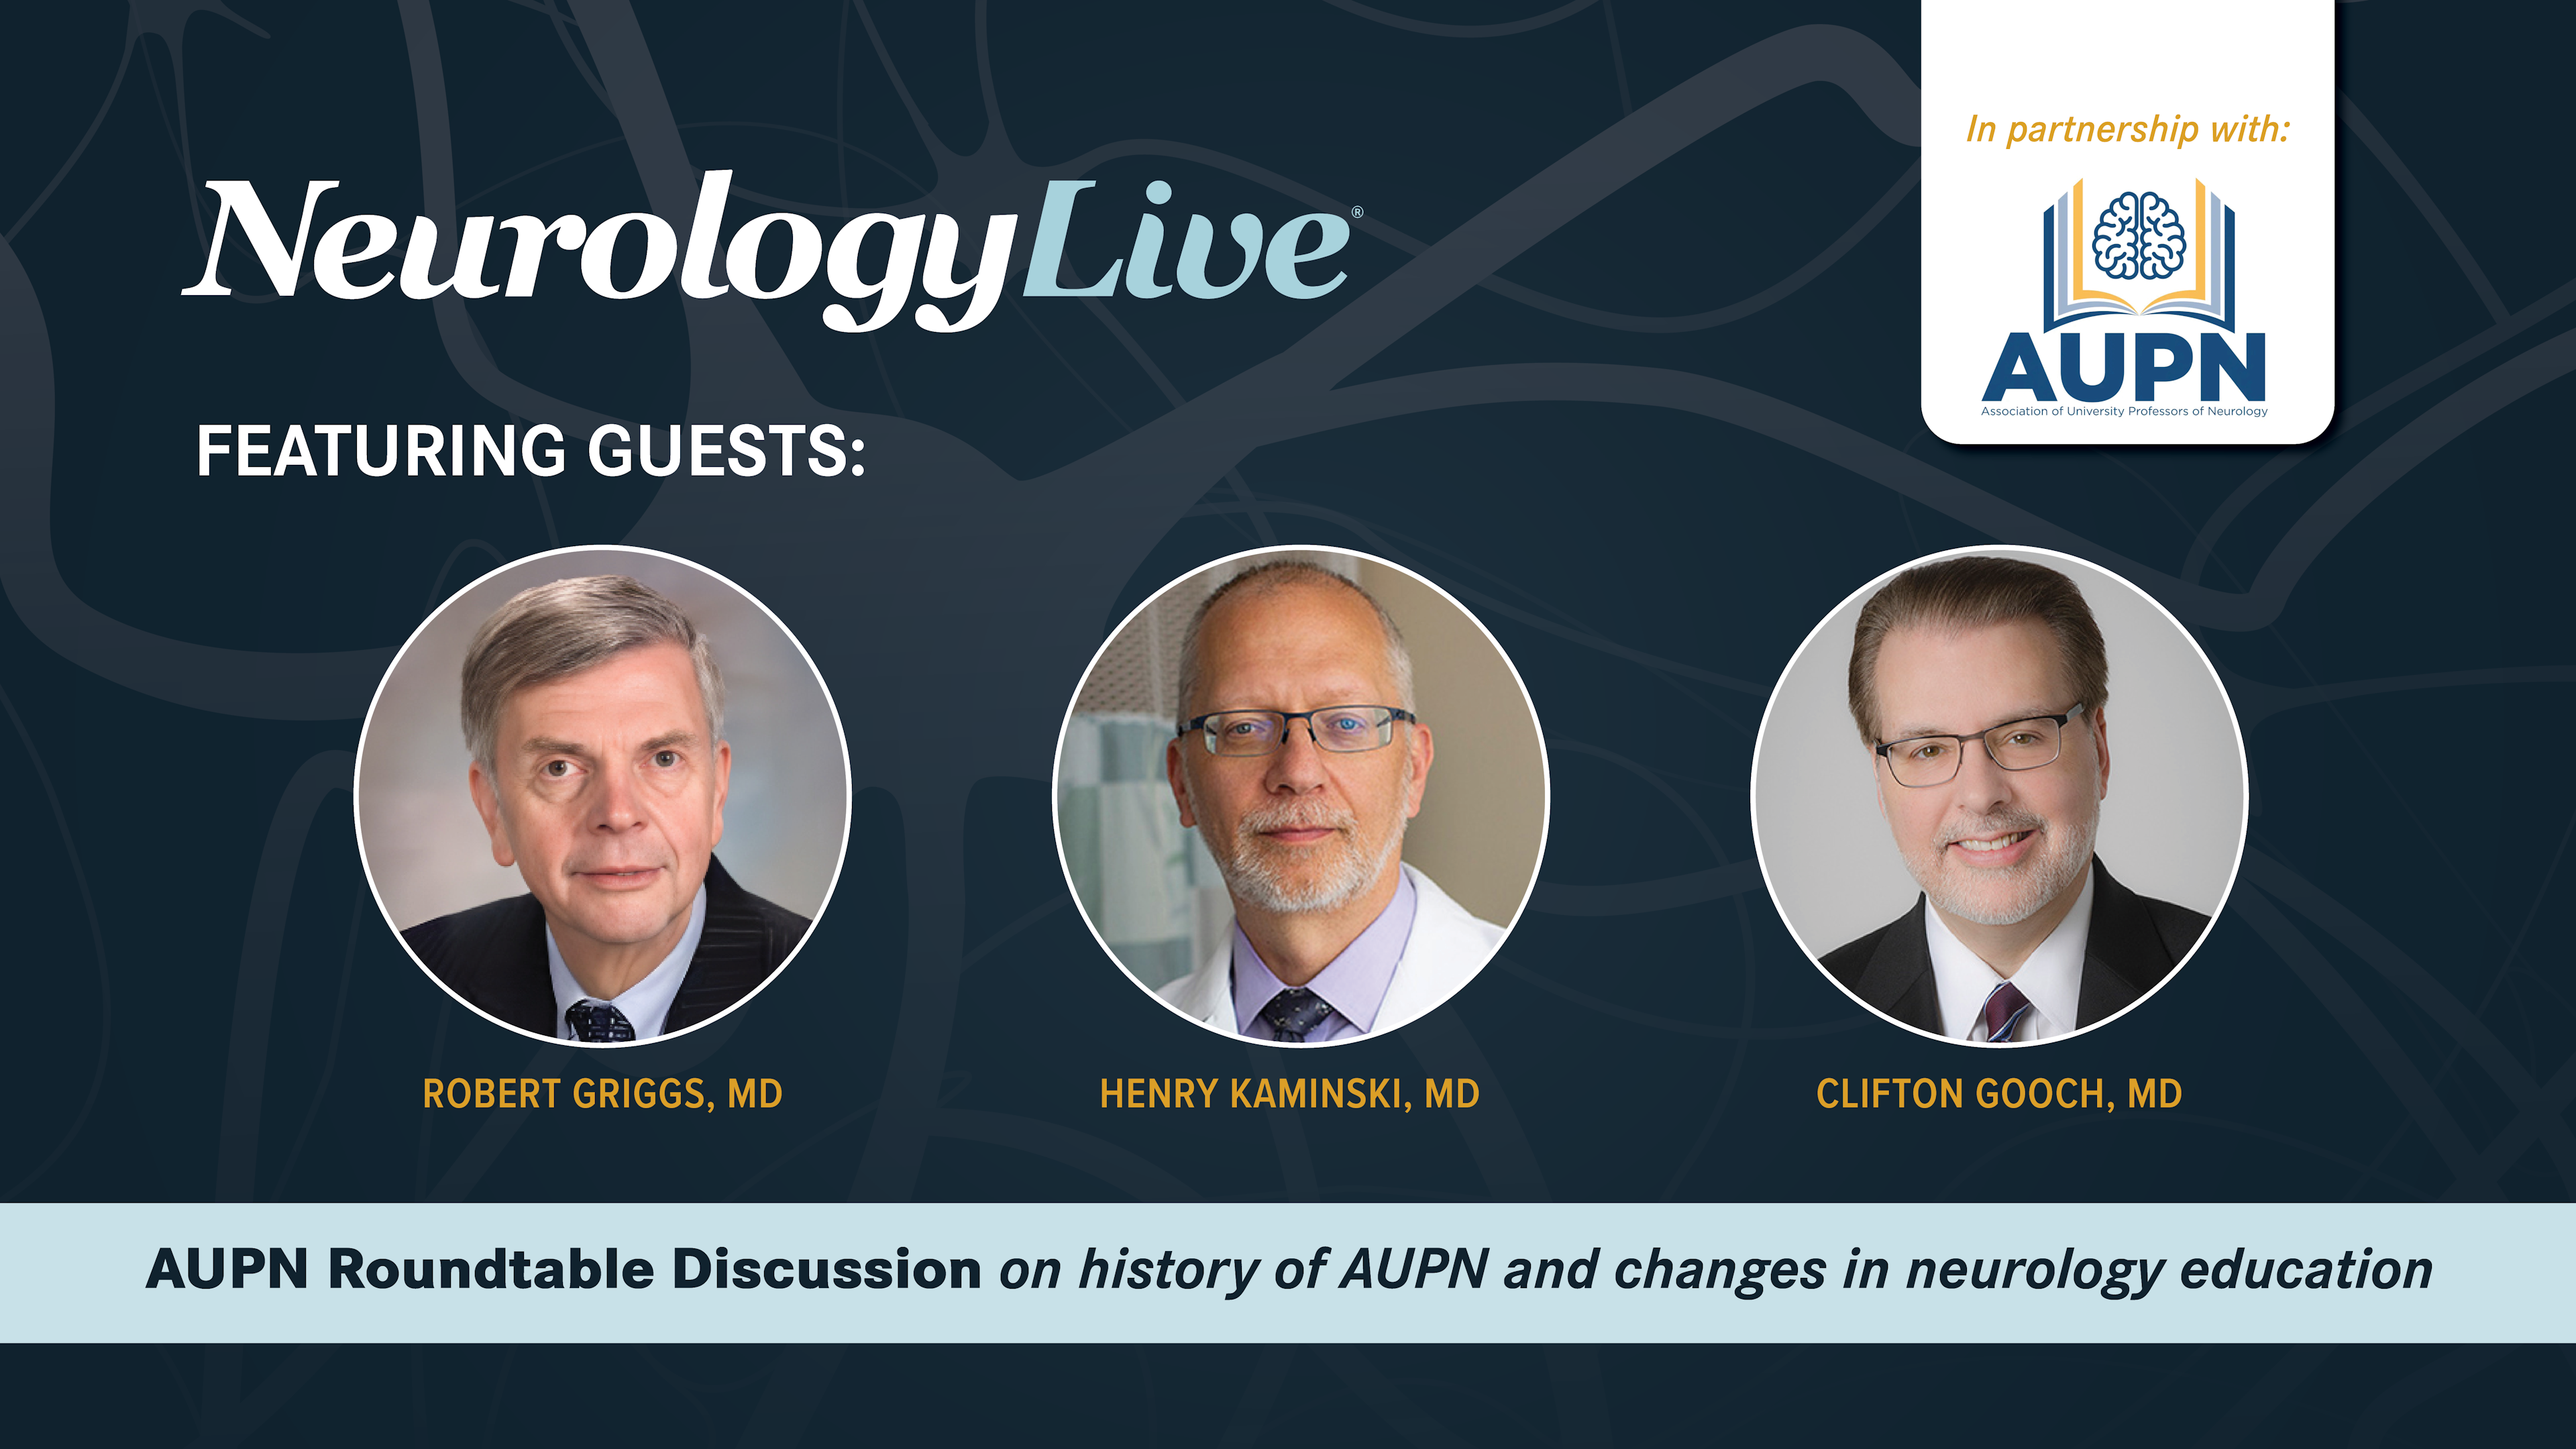 AUPN and the History of Neurology Education